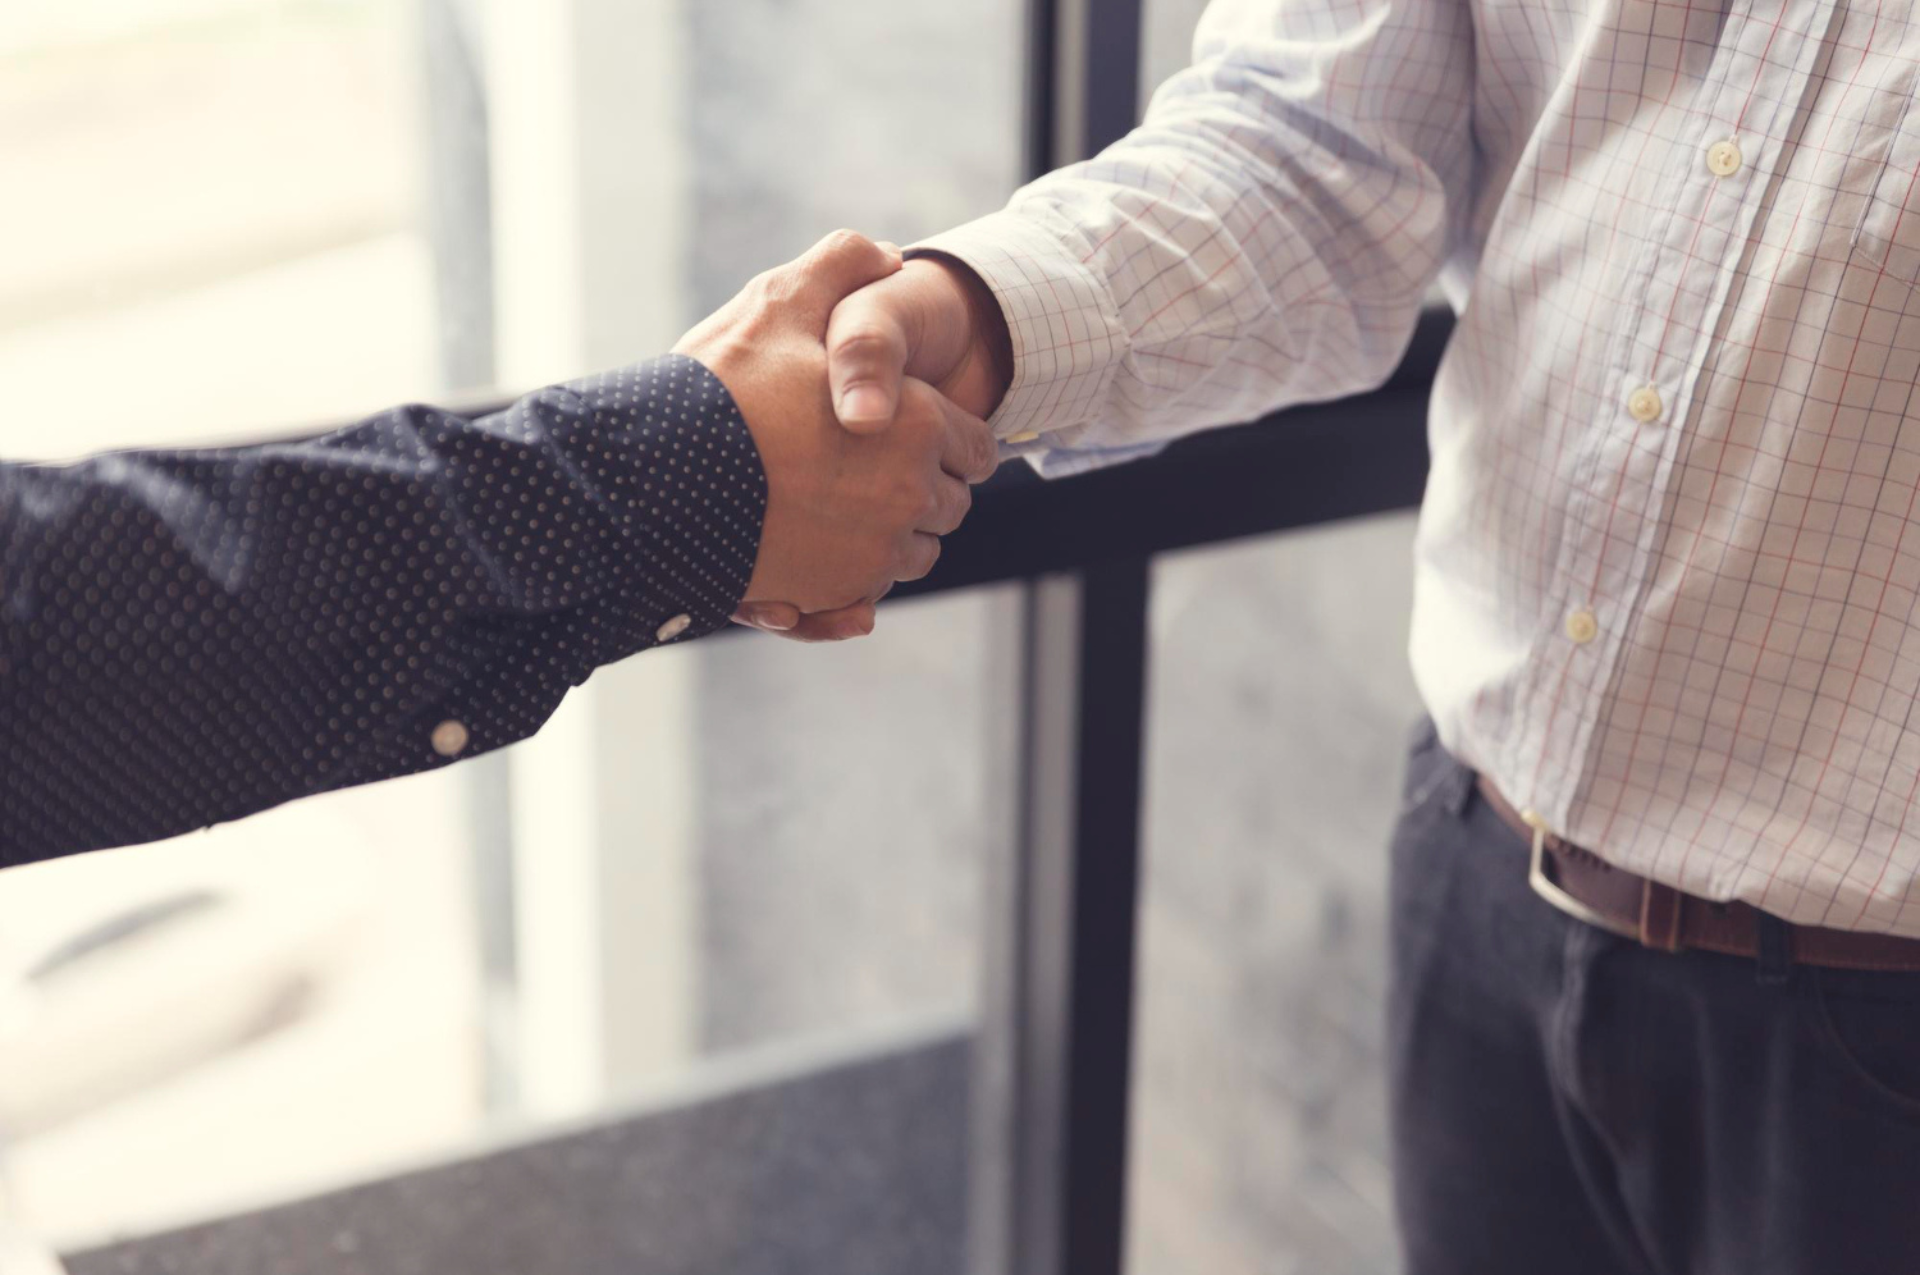 Image of two professionals shaking hands in a corporate setting, symbolizing the establishment of a partnership or agreement, likely between an ecommerce business and a fulfillment service provider.